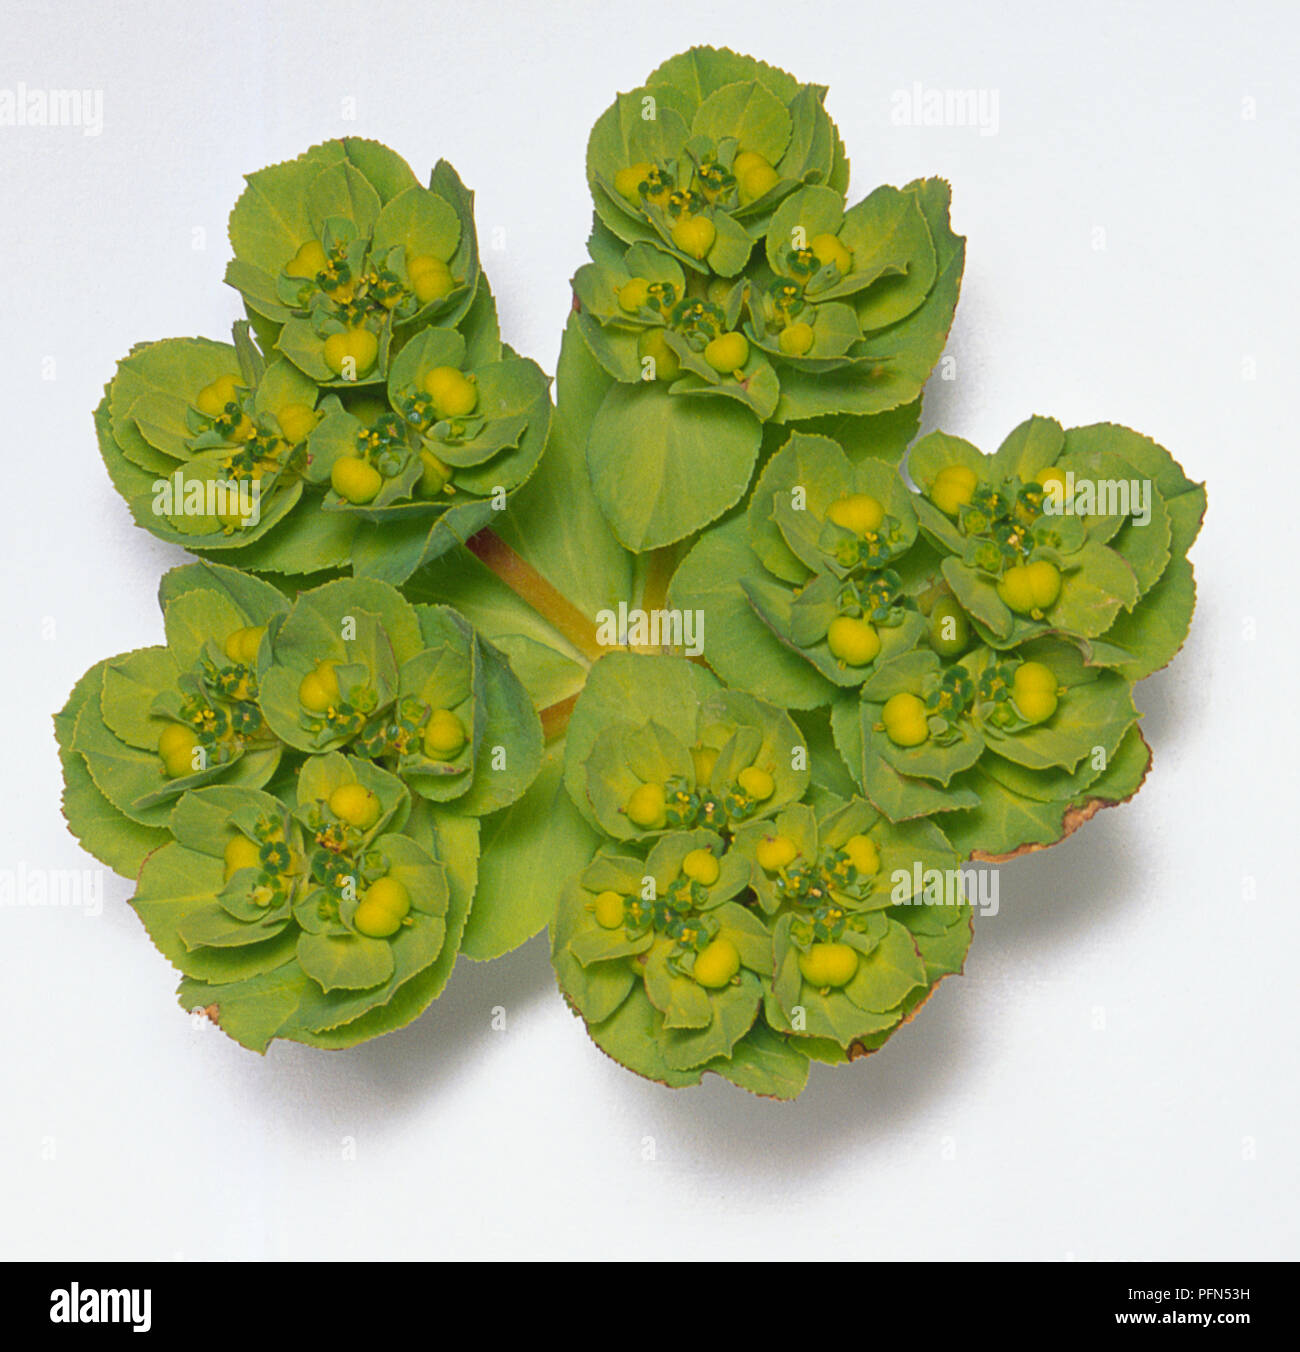 Eulorbia helioscopia, sun spurge overhead view flat rounded leaves clusters with green flowers and yellow centres. Stock Photo